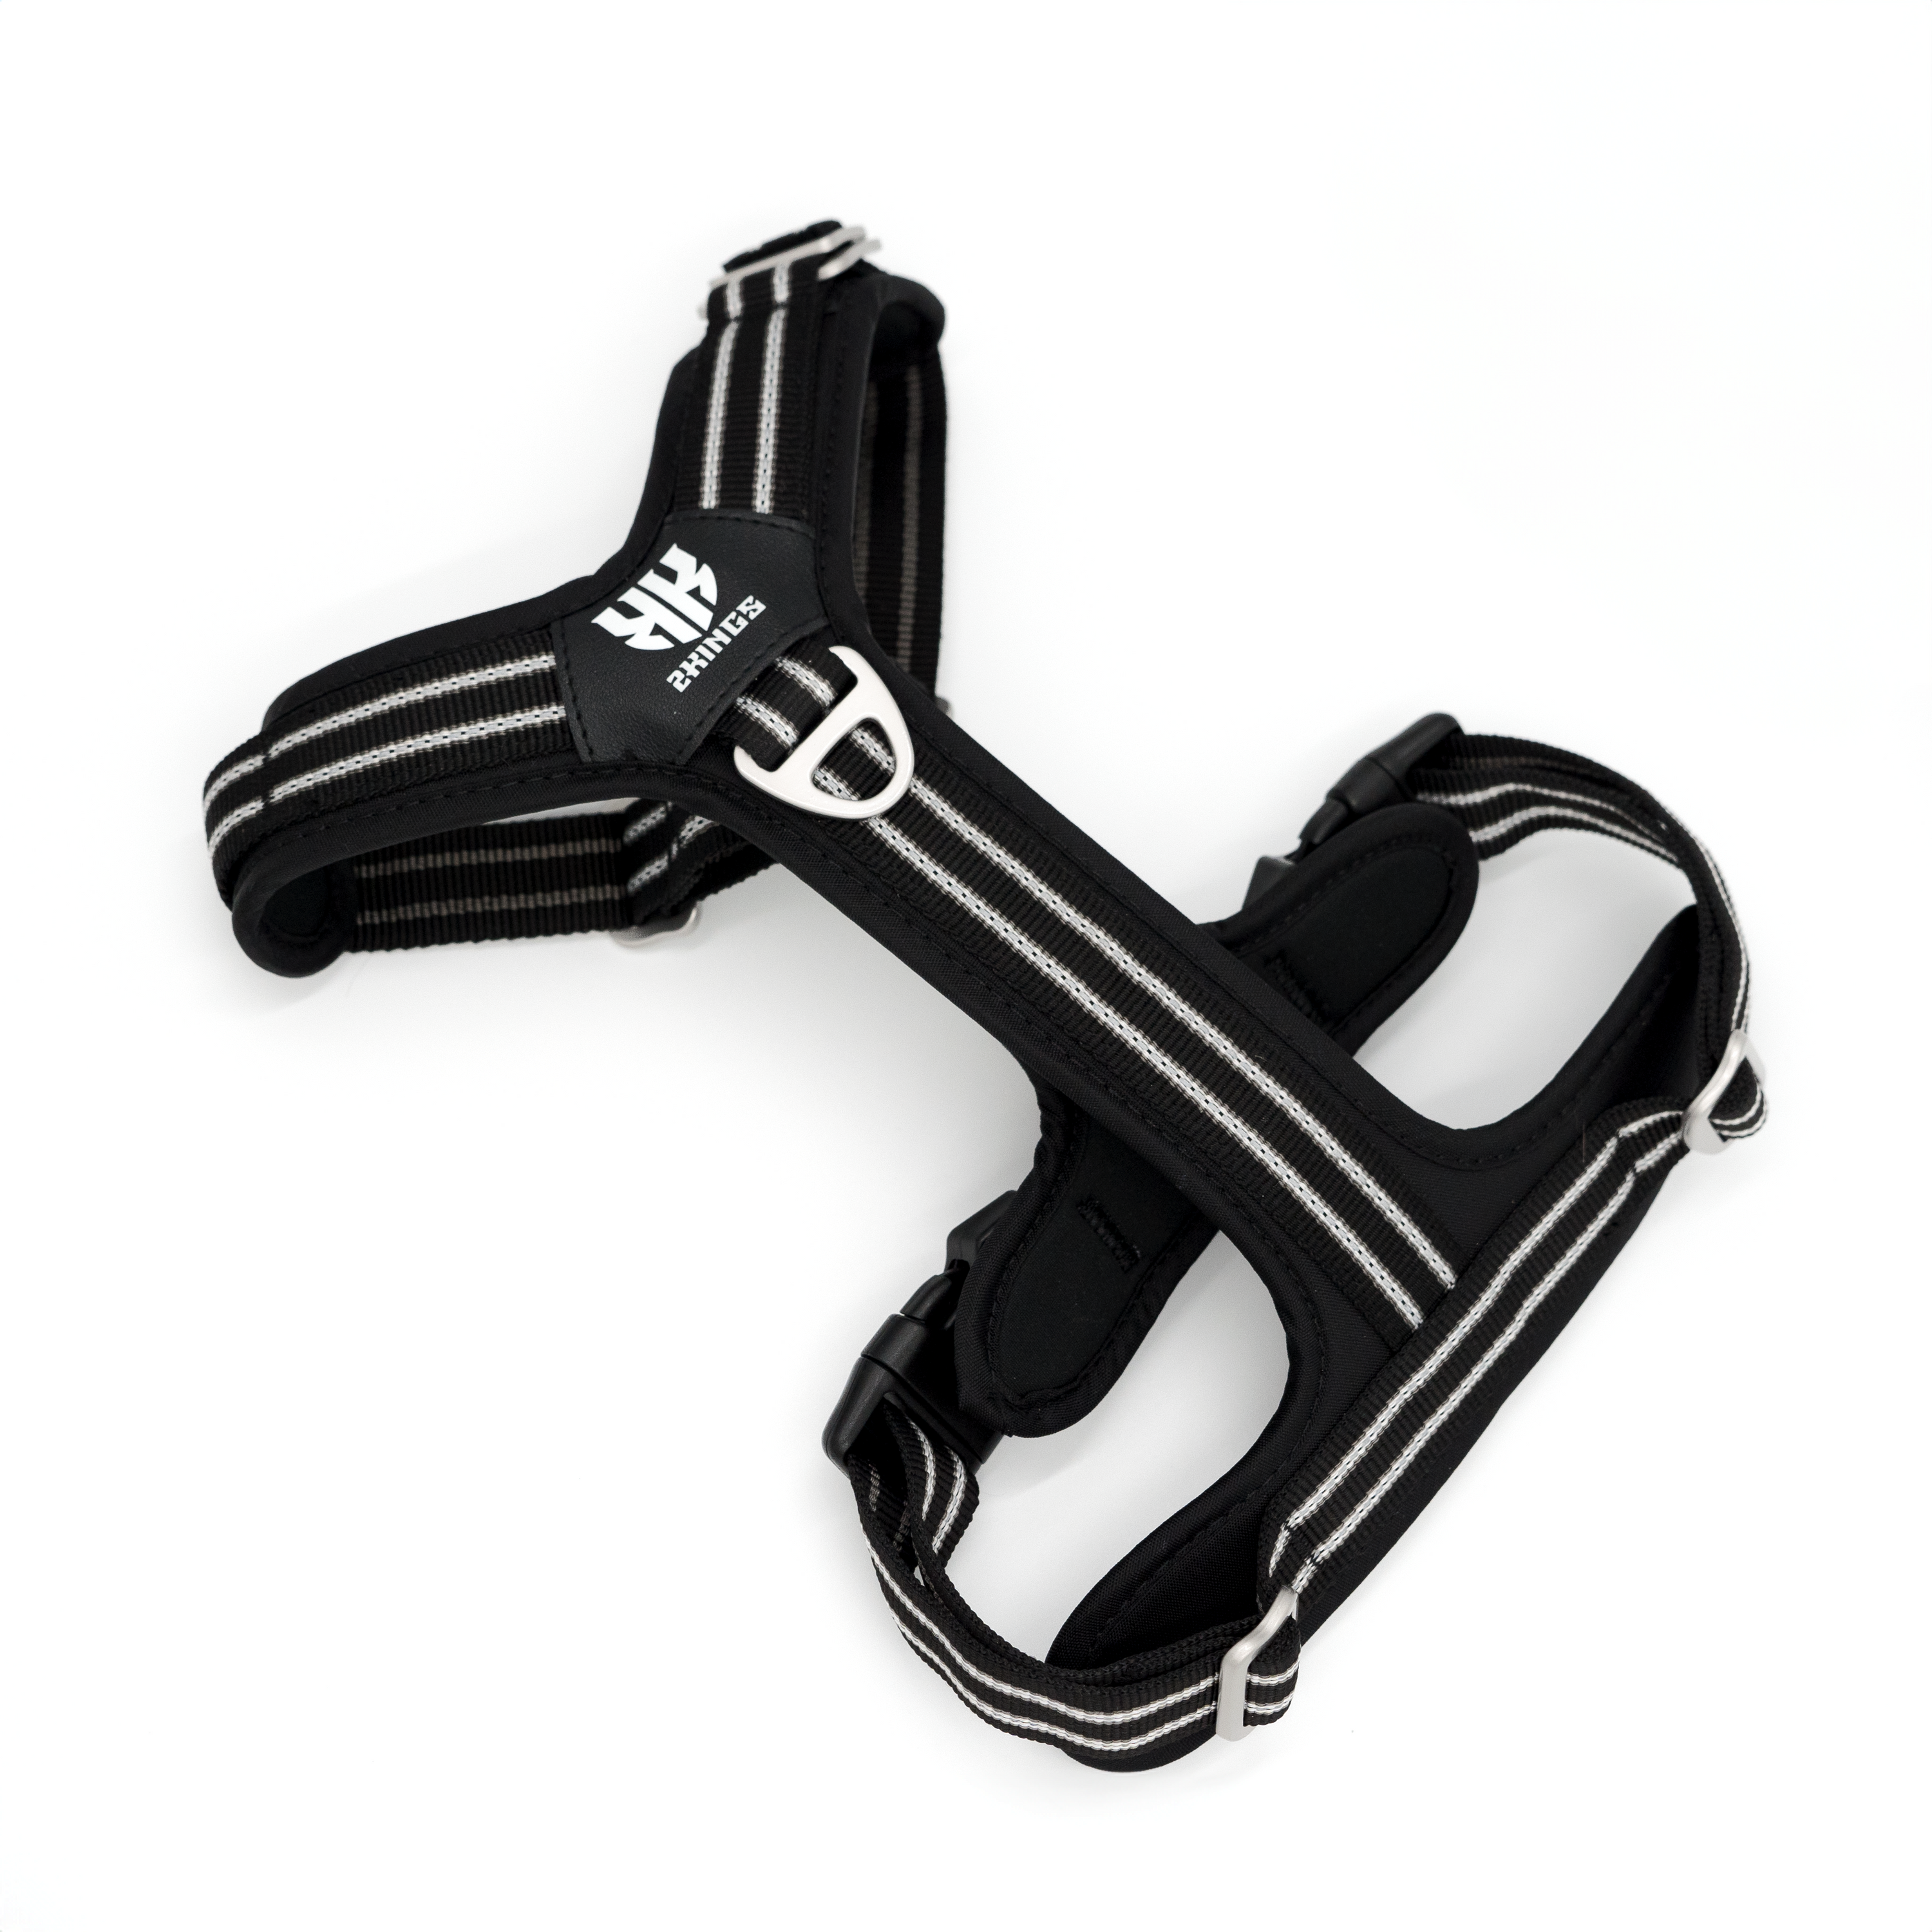 Adjustable Dog Harness with Double-Handed Lead Set - Lightweight & Reflective -Black.